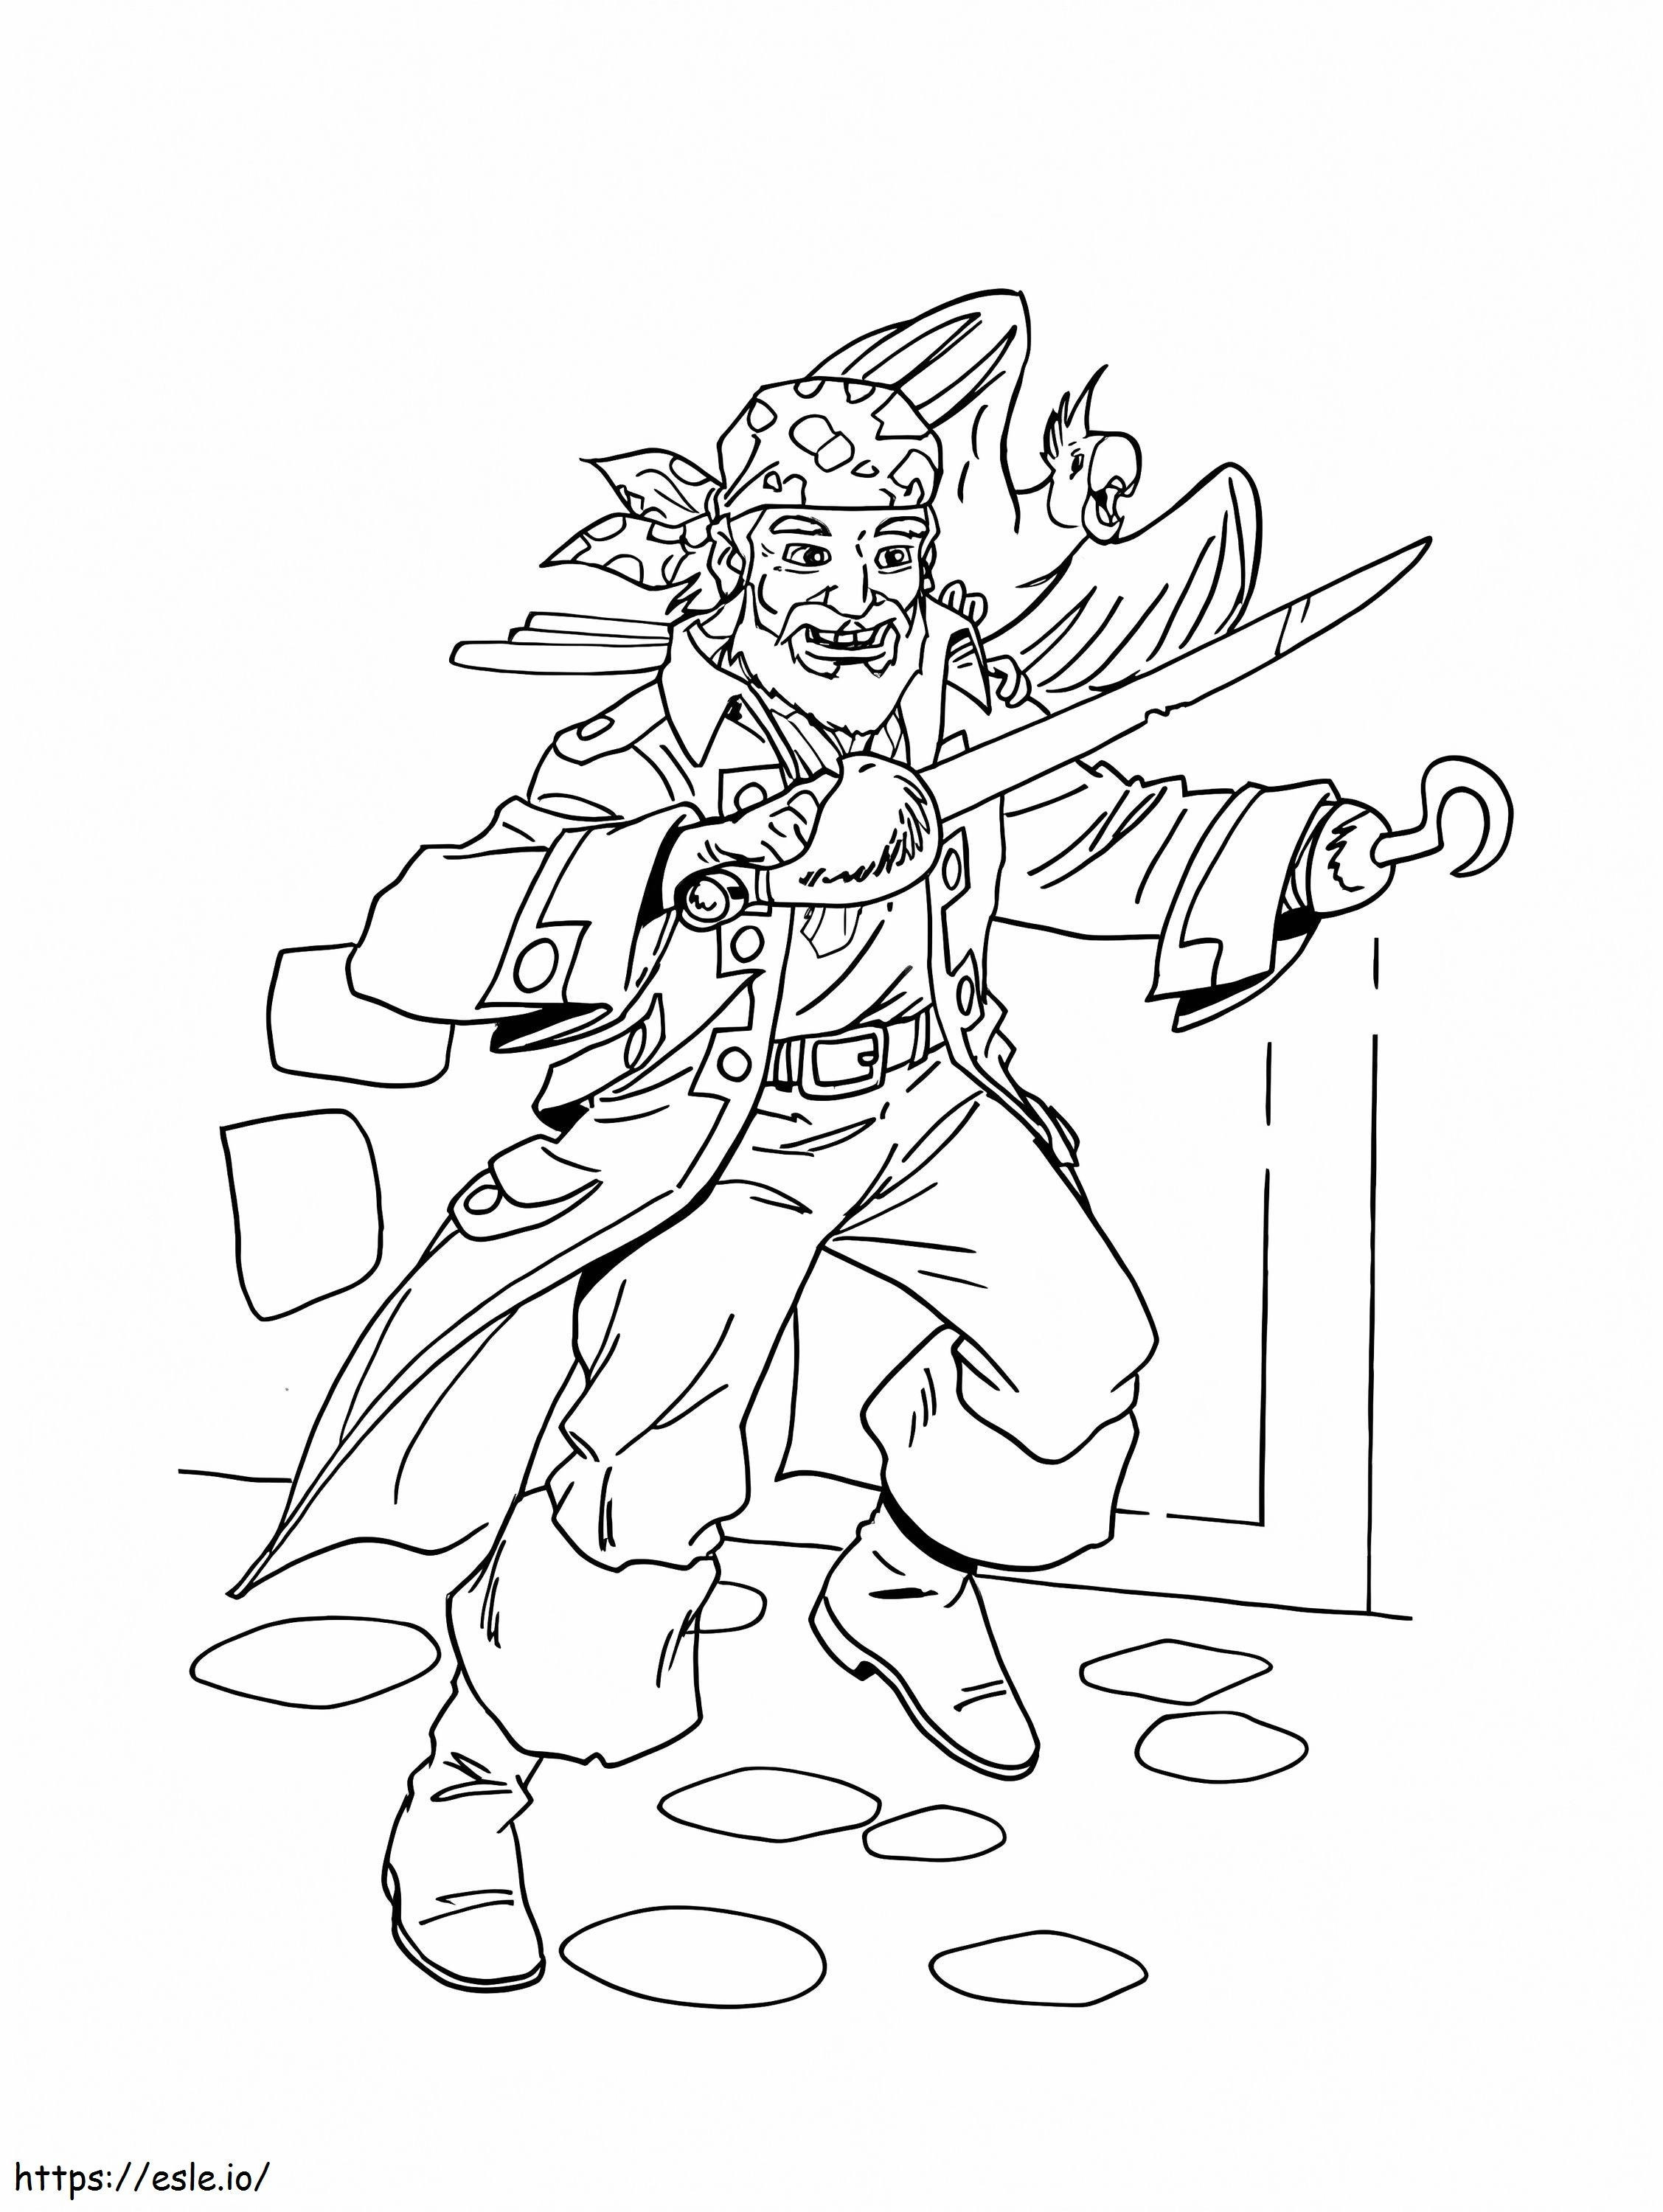 Pirate And His Parrot coloring page